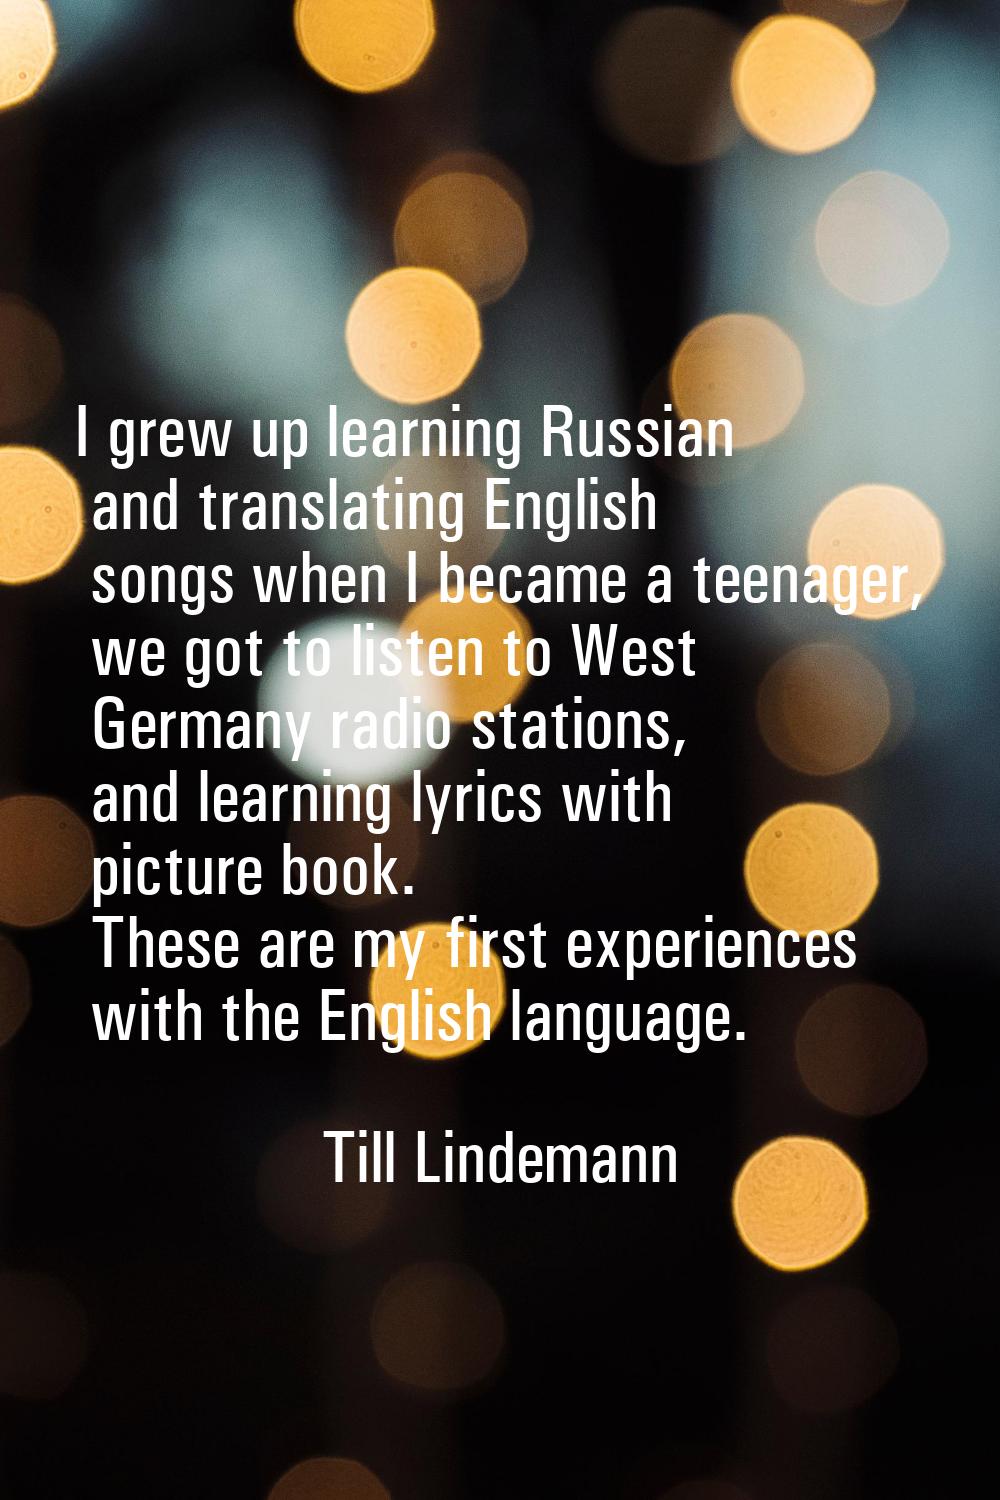 I grew up learning Russian and translating English songs when I became a teenager, we got to listen